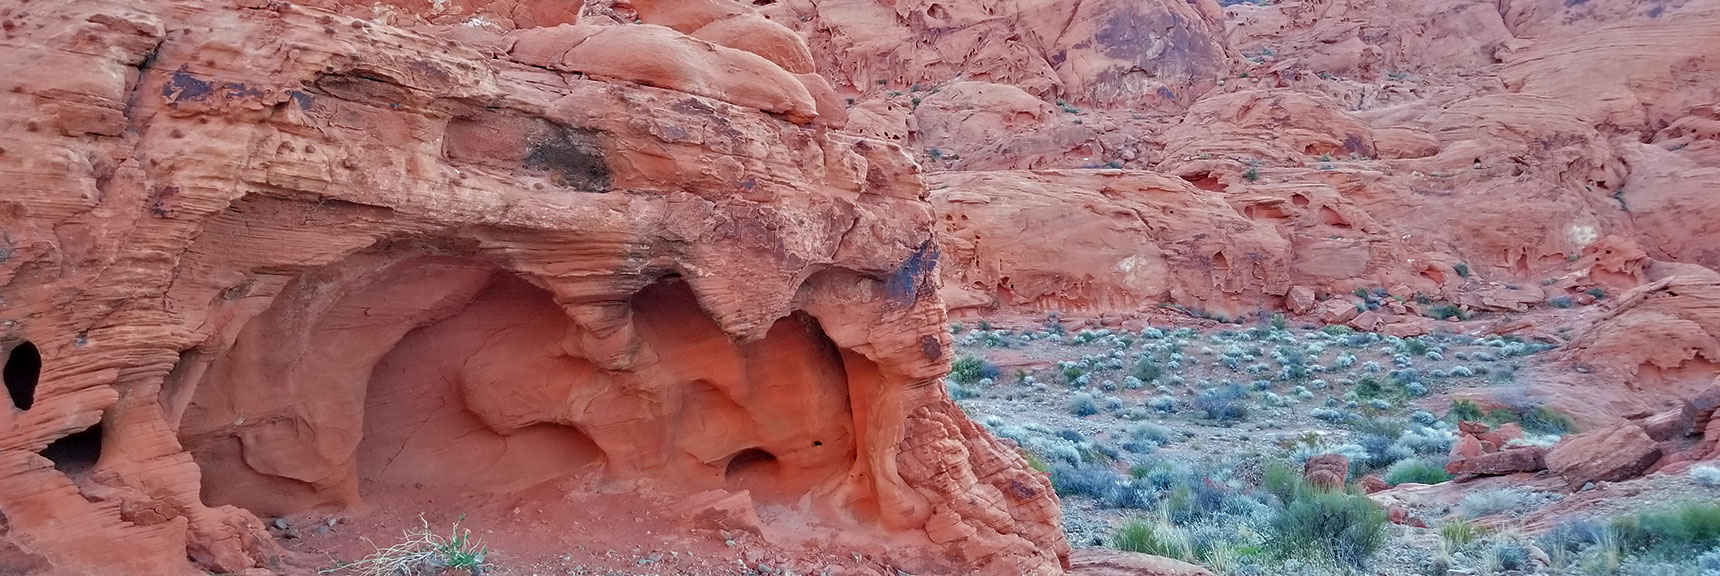 Bizarre Rock Formations in the Pass on Prospect Trail in Valley of Fire State Park, Nevada